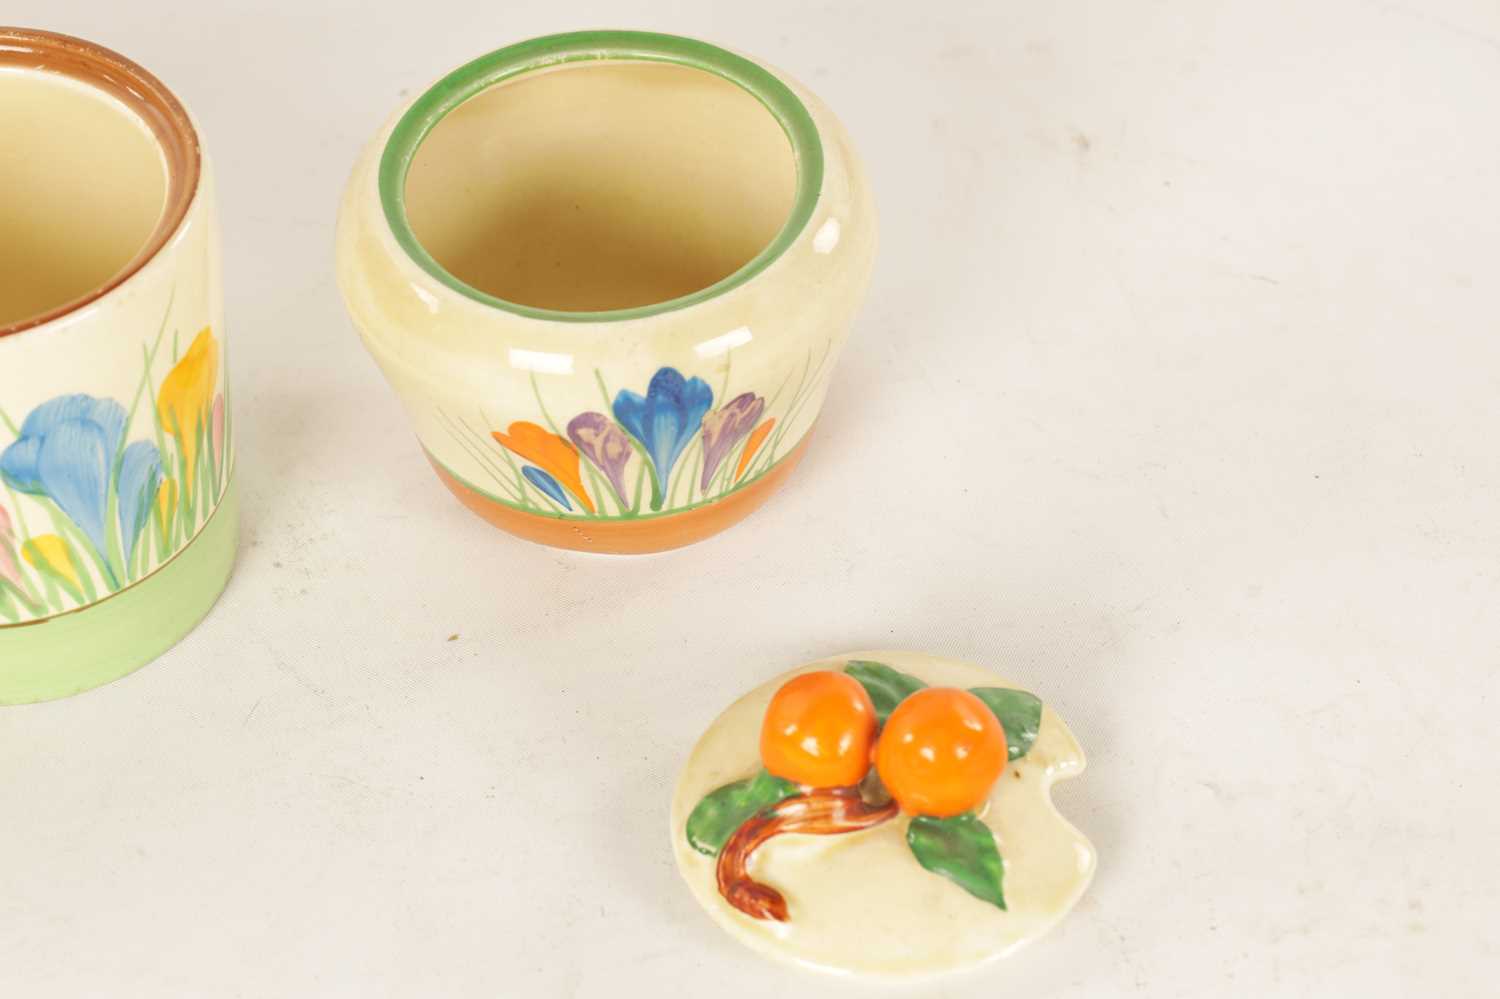 A COLLECTION OF CLARICE CLIFF “CROCUS” PATTERN POTTERY - Image 6 of 11